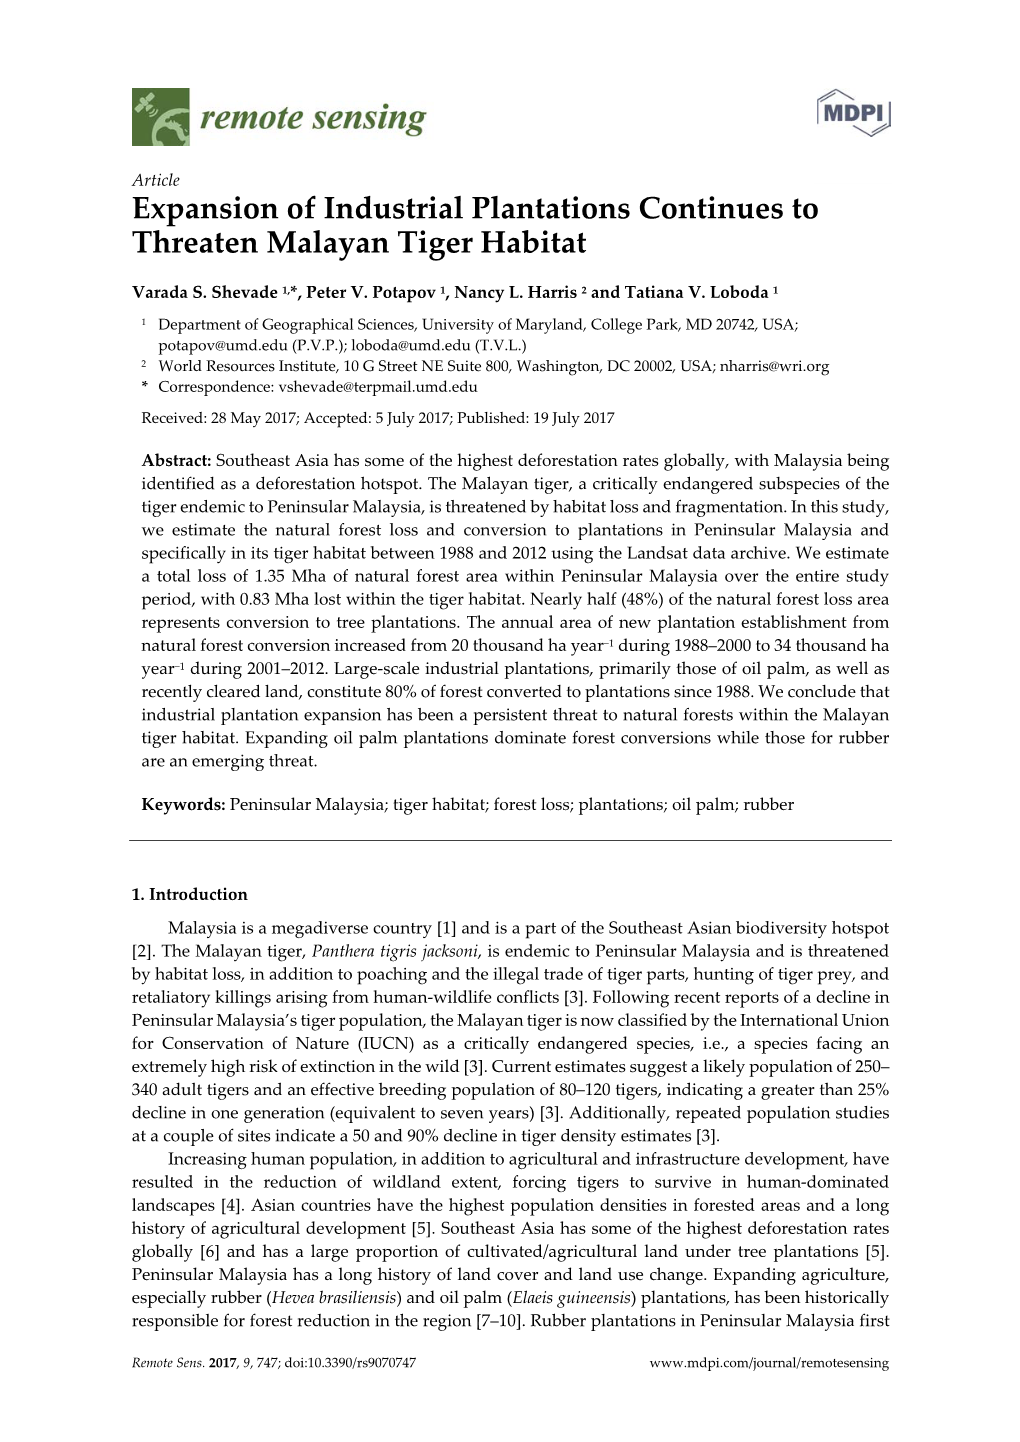 Expansion of Industrial Plantations Continues to Threaten Malayan Tiger Habitat